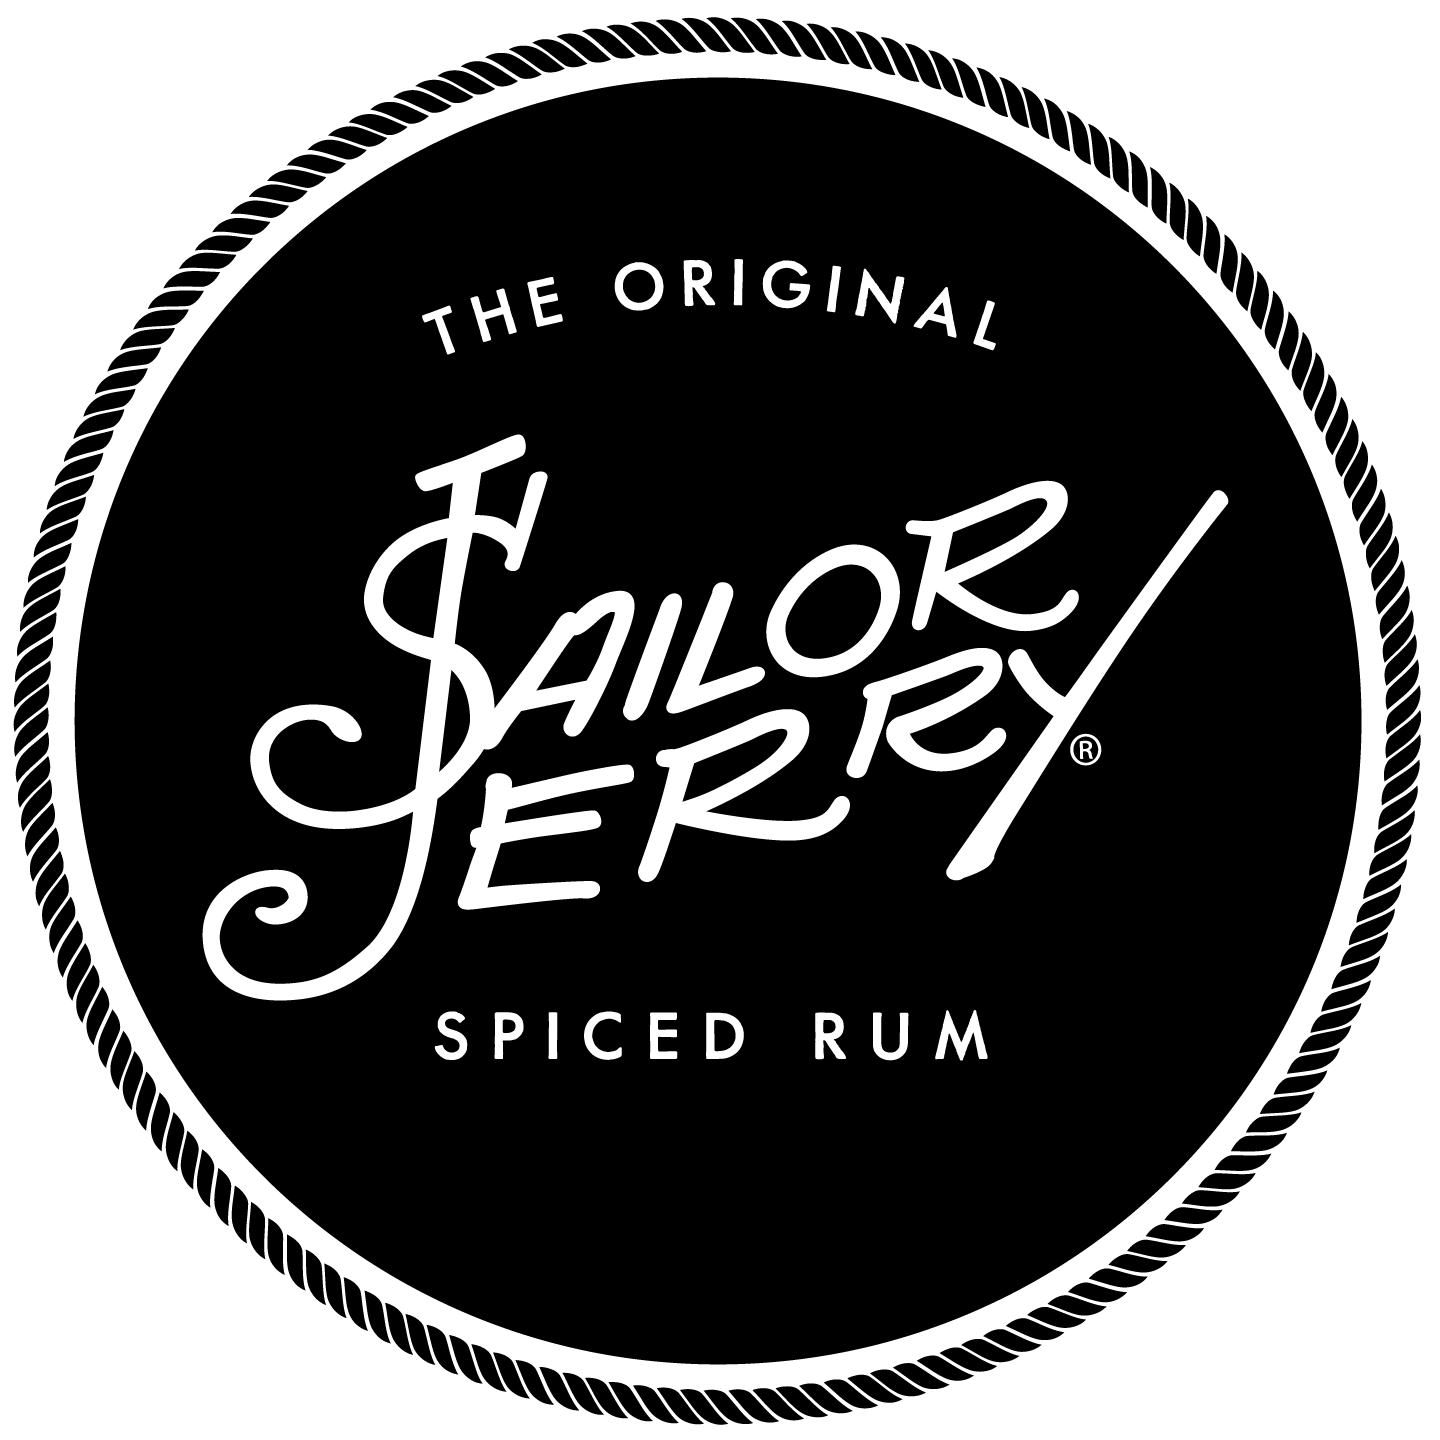 Black Circle With The Original Spiced Rum Sailor Jerry Text Logo